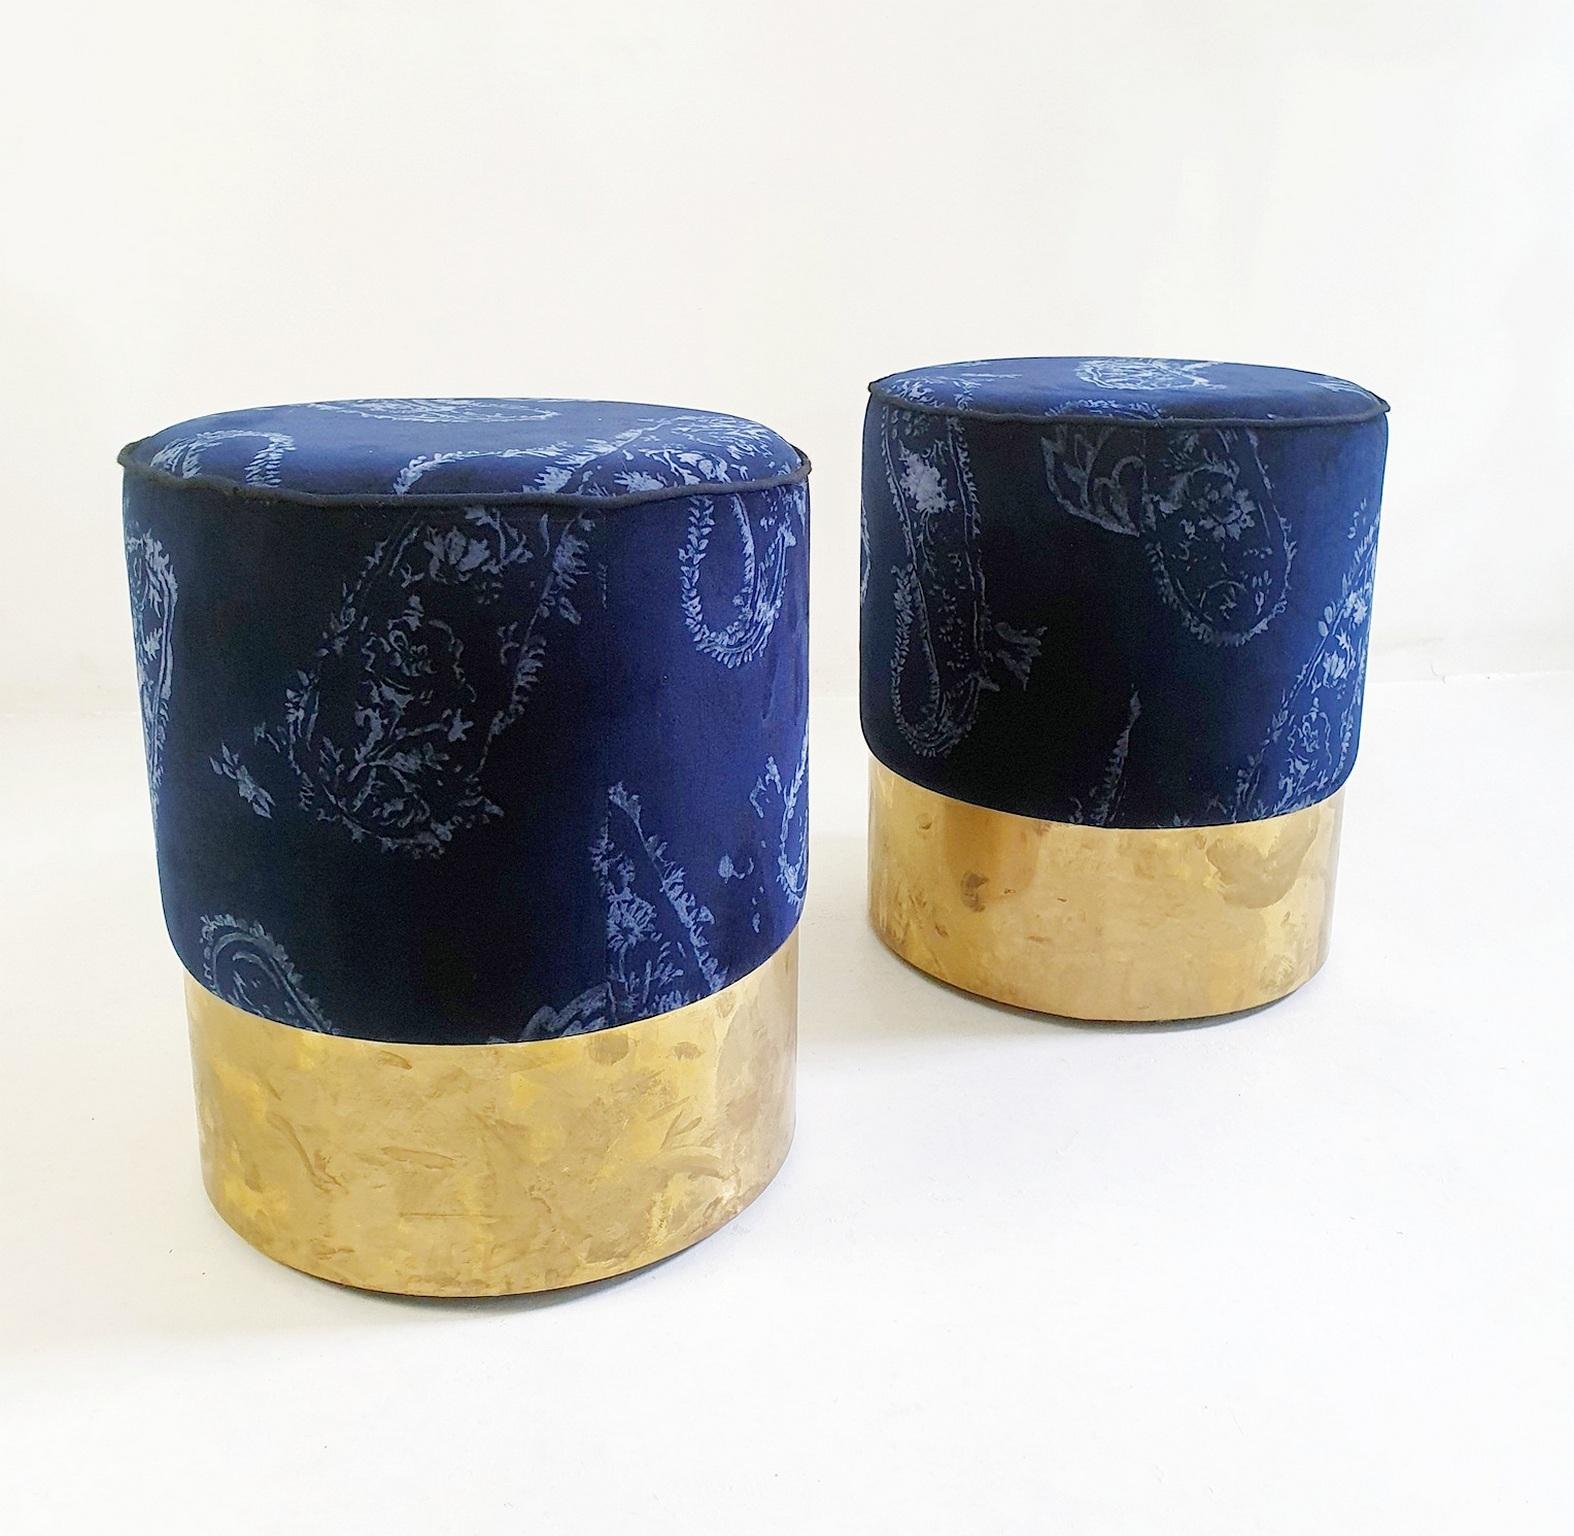 These particular poufs are handmade in Italy and upholstered with a paisley printed blue velvet and have a finishing rim in brass. There is a superb quality and stability due to the underlying wood structure and they stand firmly on the ground. The